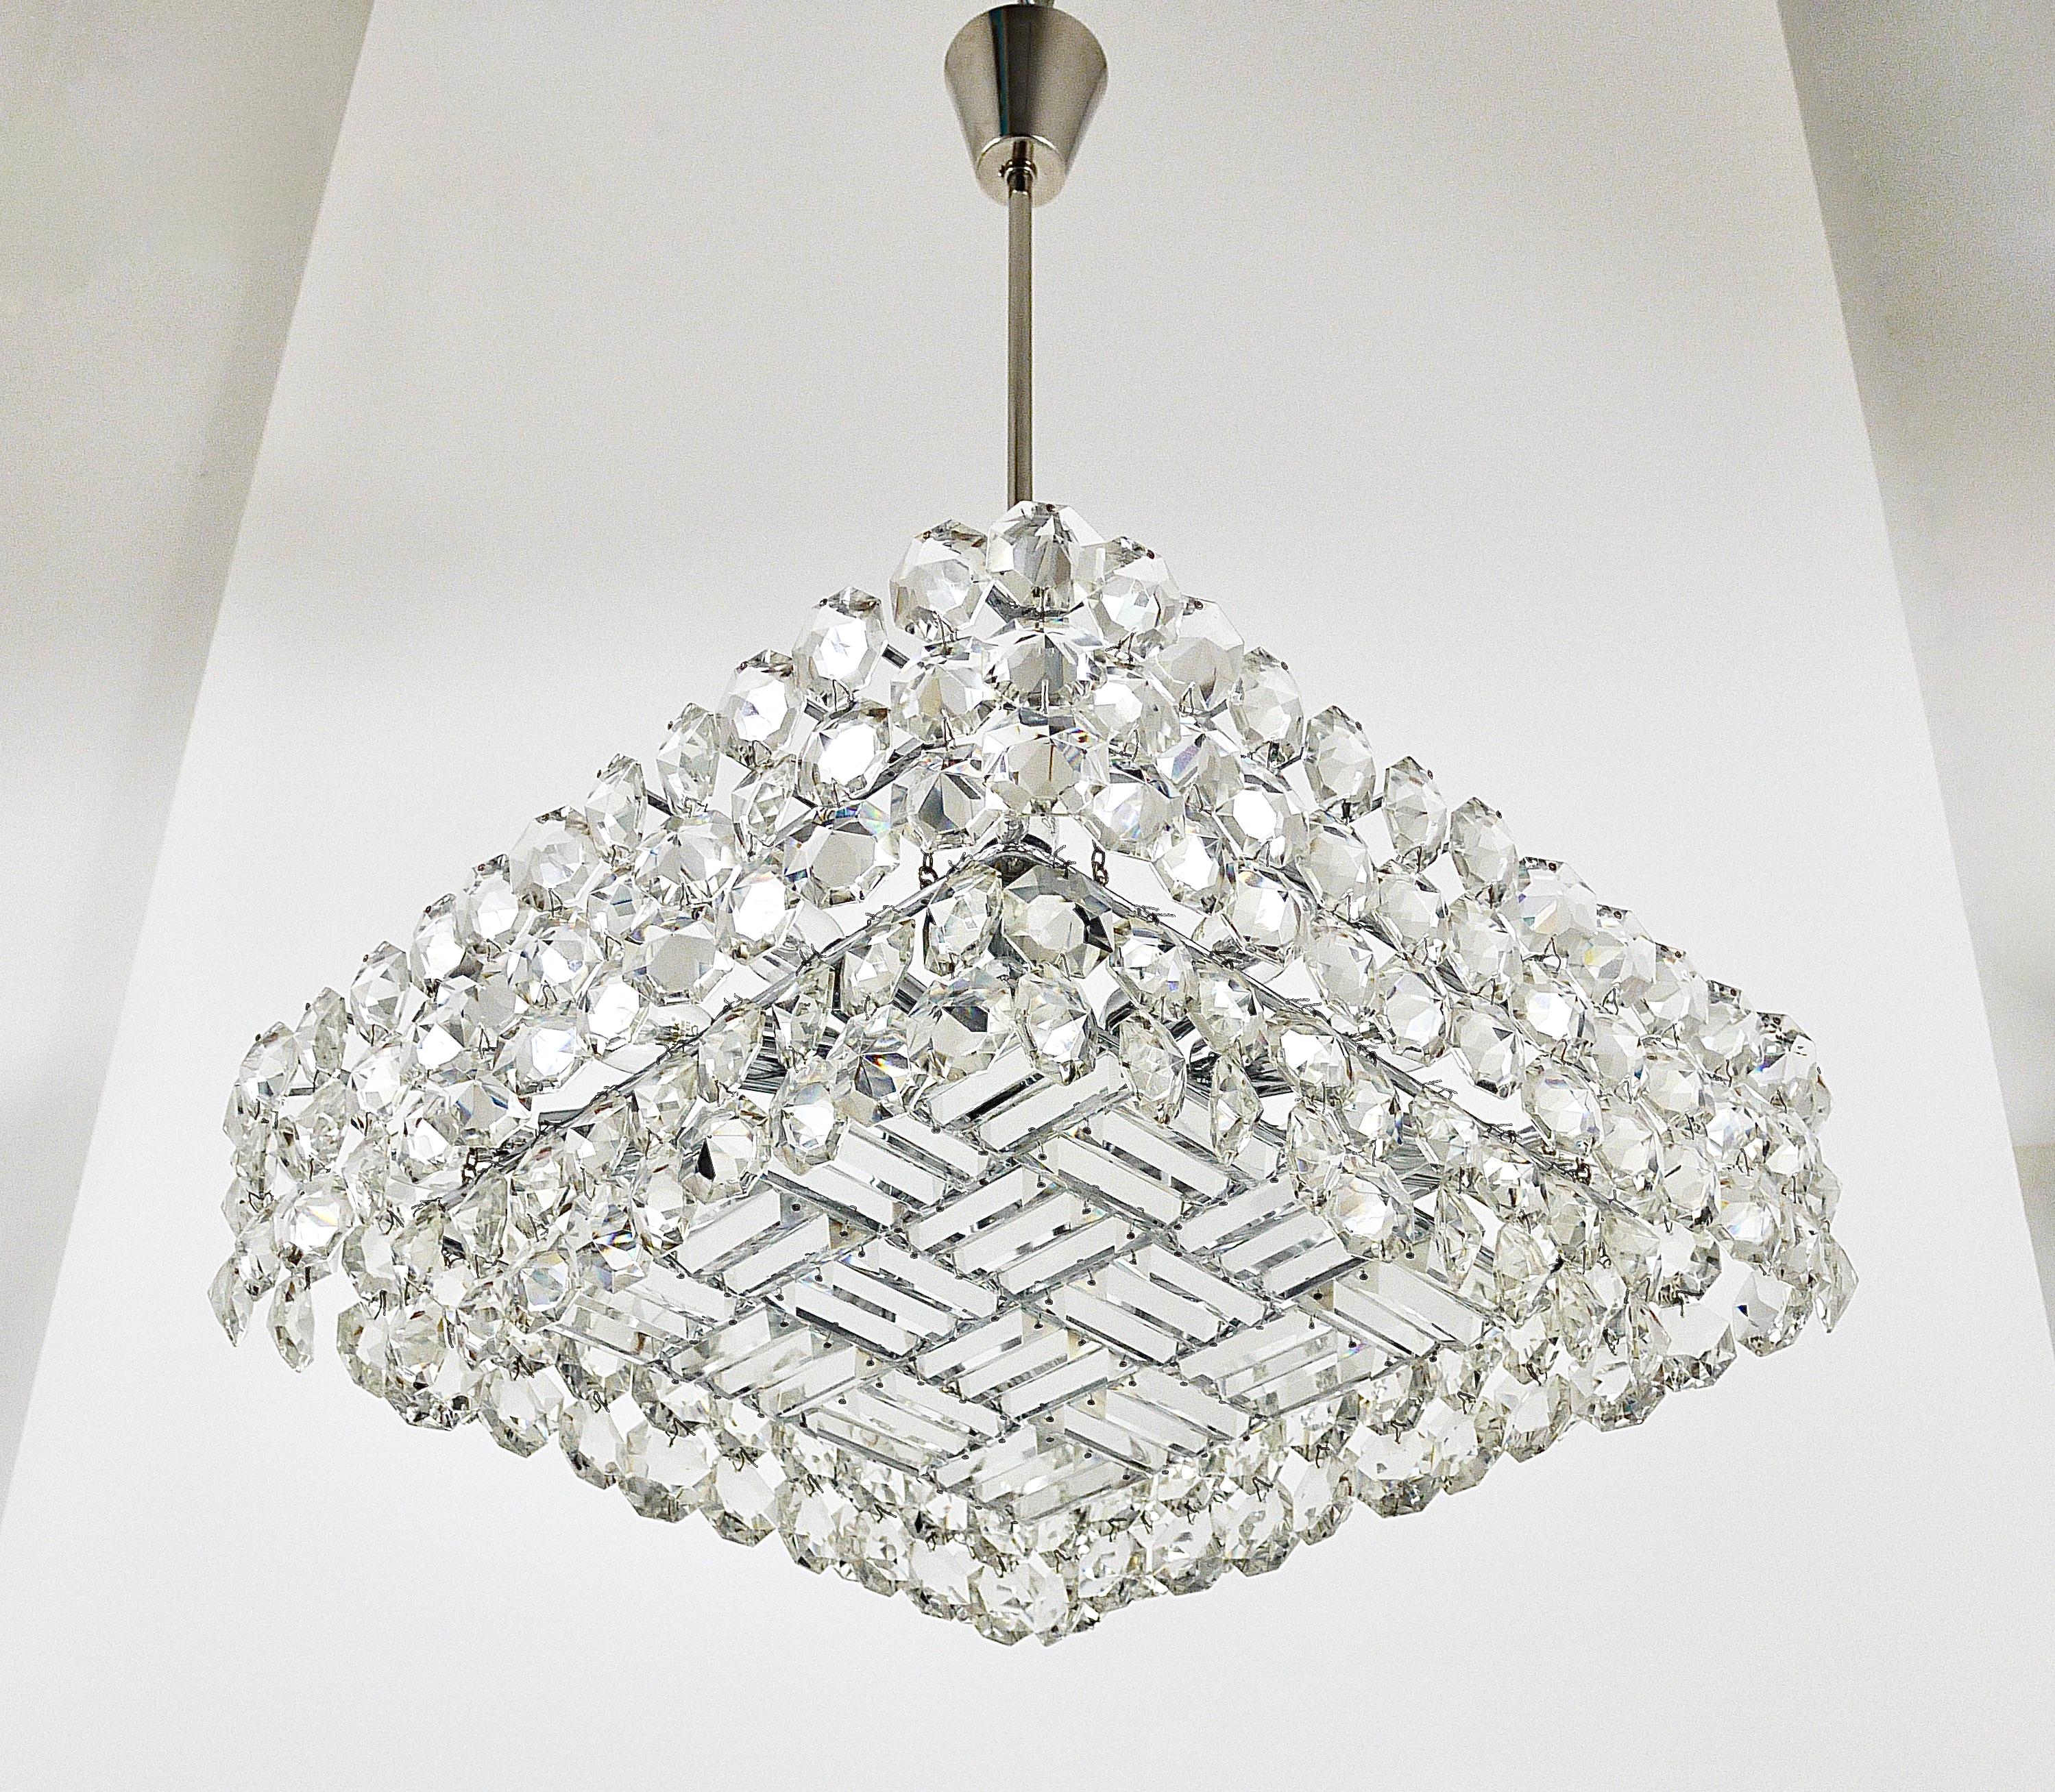 A beautiful, large brass crystal chandelier from the 1950s, manufactured by Bakalowits & Söhne, Vienna/Austria. Nickel-plated hardware, it has two tiers, fully covered by big, octagonal diamond-shaped faceted crystals. This chandelier has 16-light